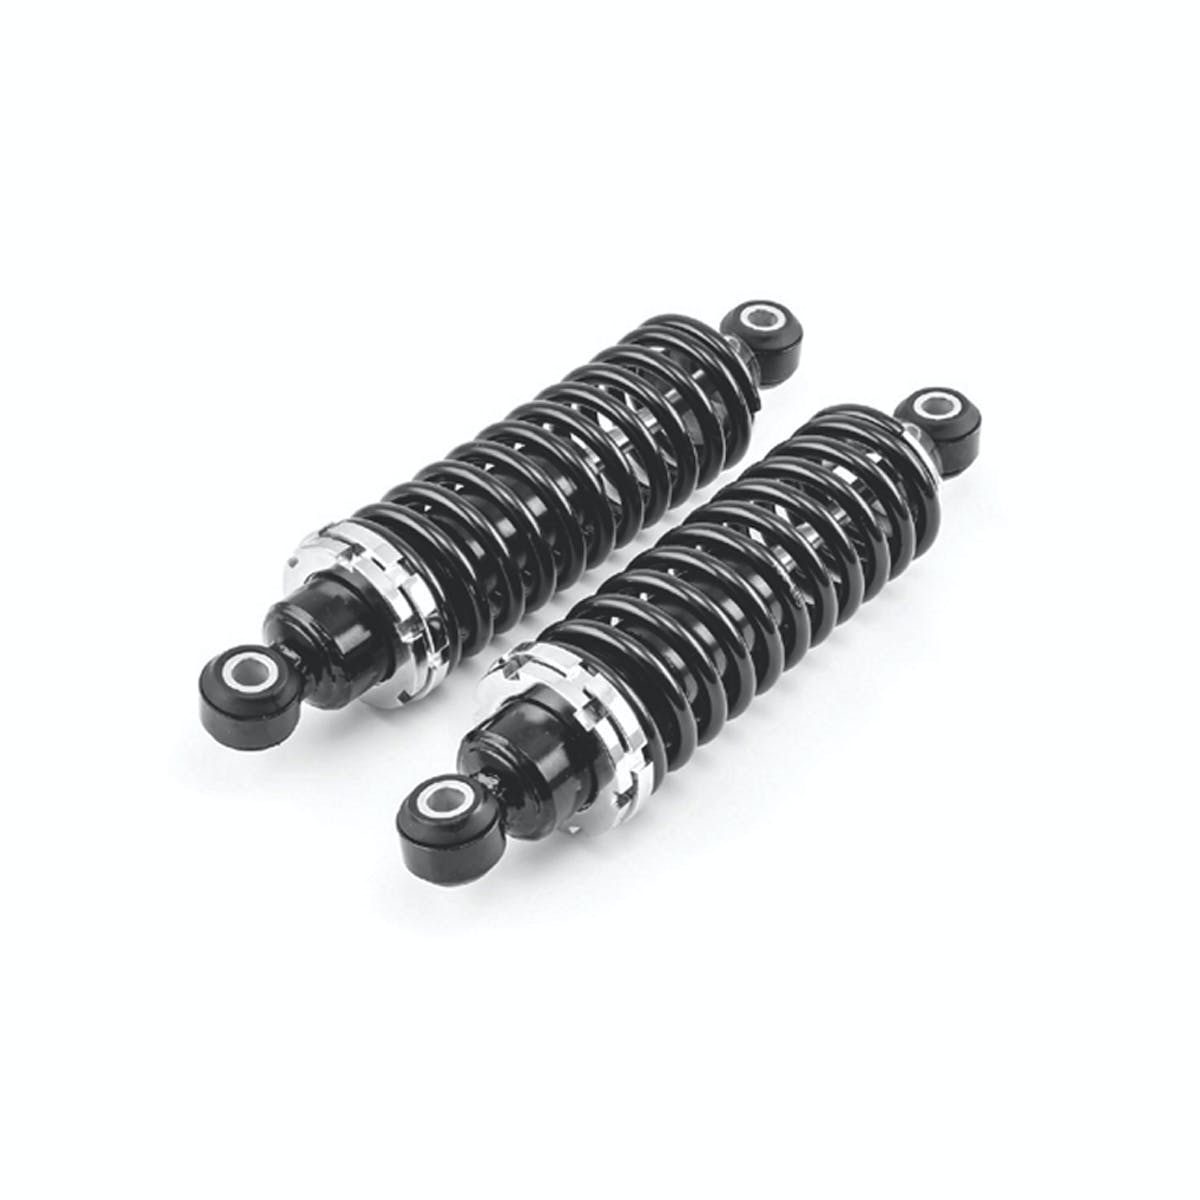 Speedmaster PCE494.1006 350 lbs/in Spring Rate 12 Coil Over Shock Assemblies Adjustable (Pair)